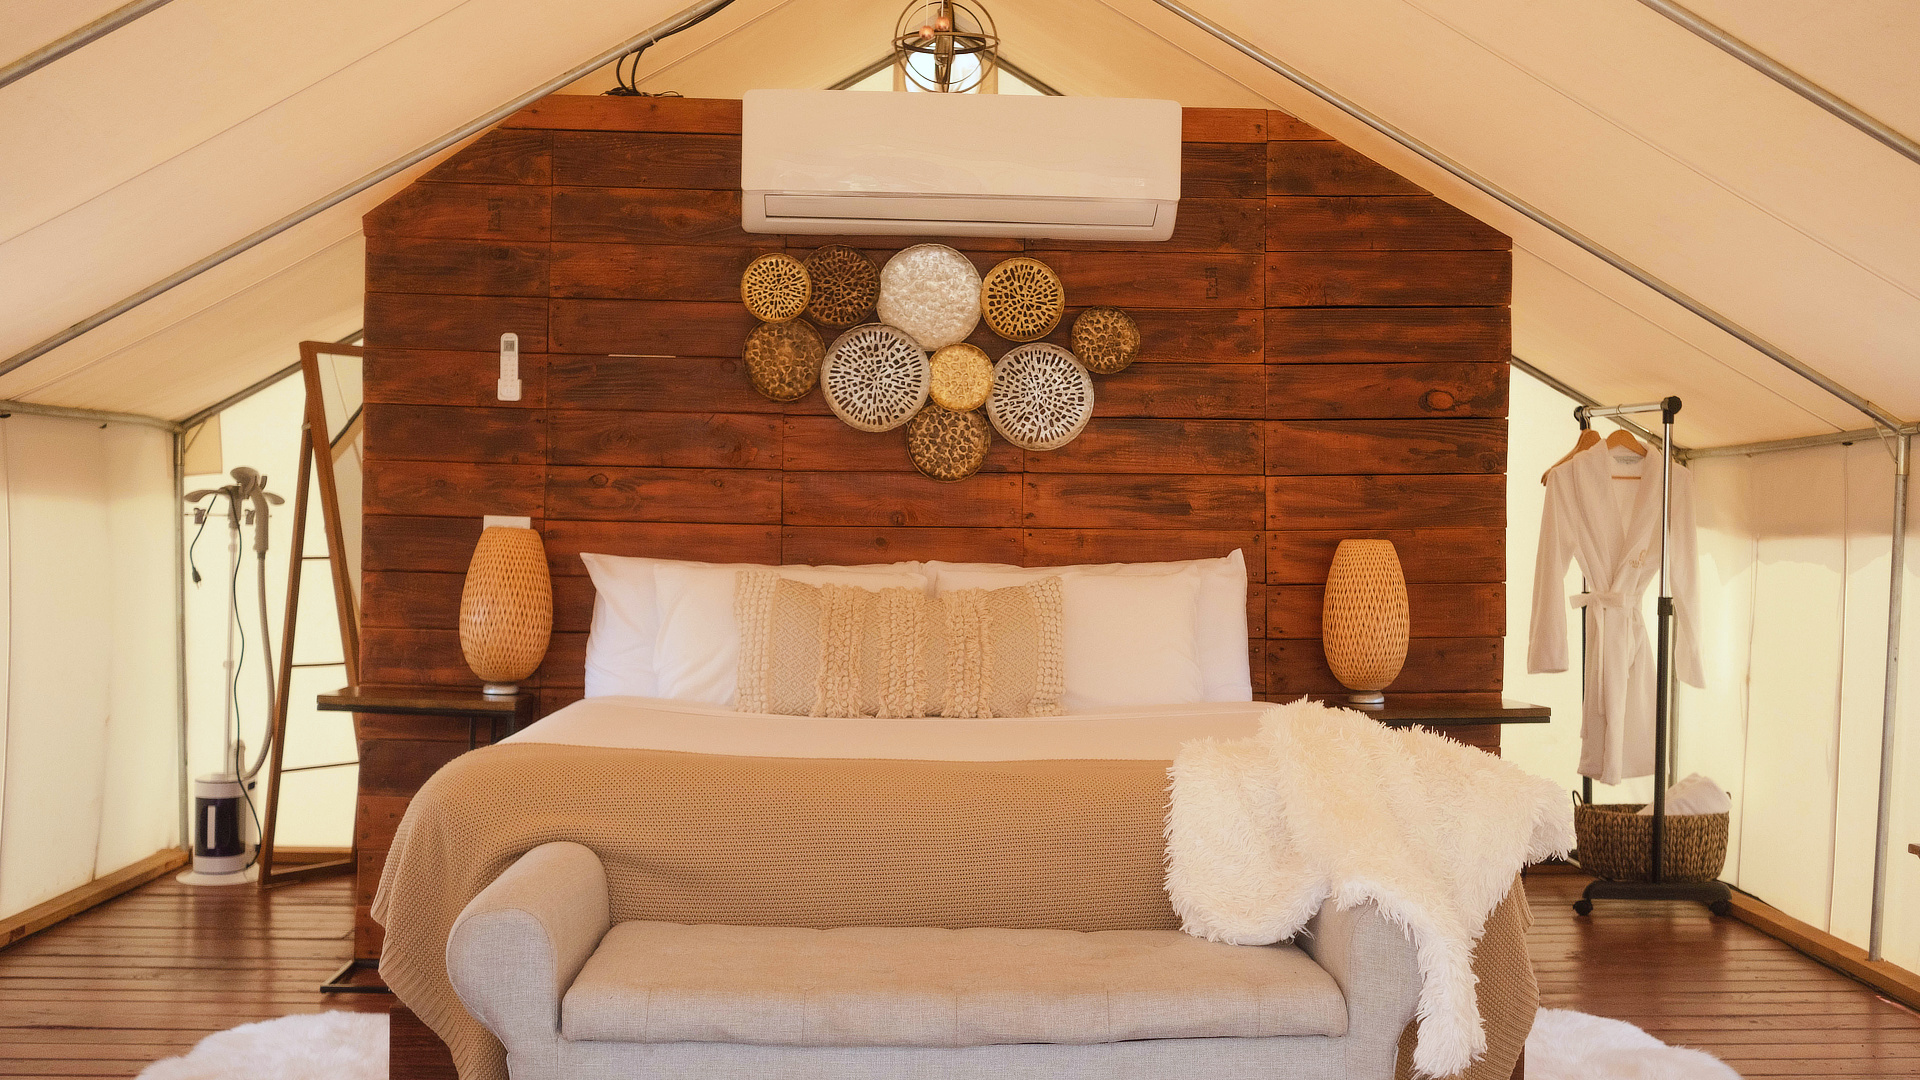 What’s the Difference Between Glamping, Camping, and RVing?